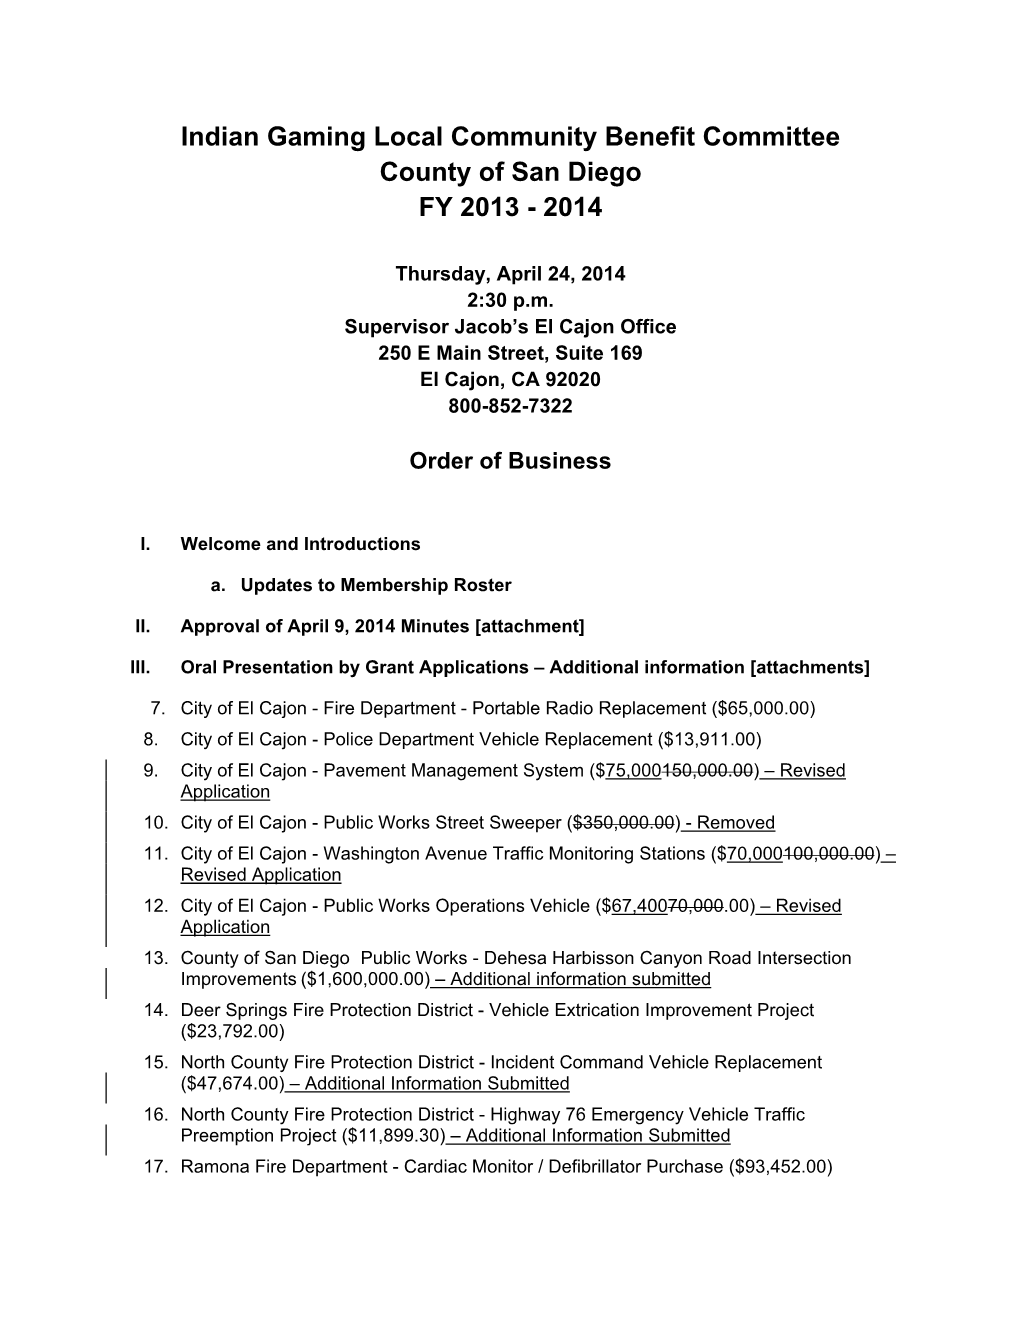 Indian Gaming Local Community Benefit Committee County of San Diego FY 2013 - 2014